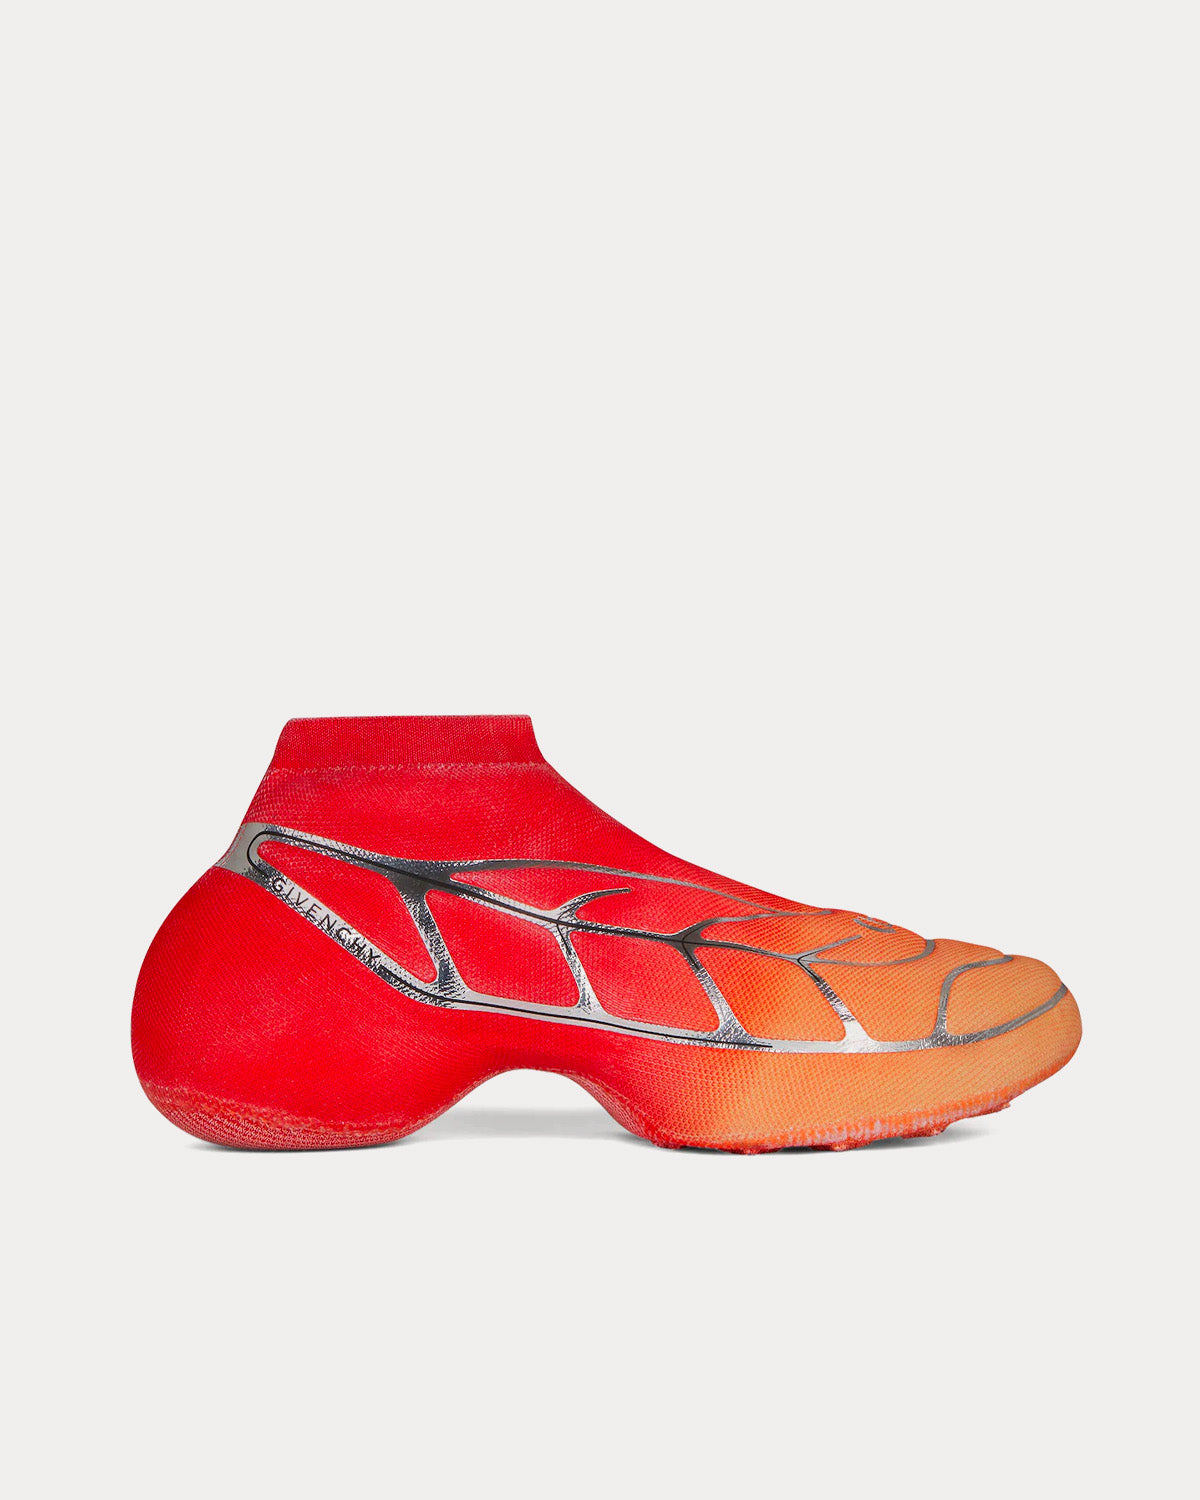 Givenchy x BSTROY - TK-360+ Mid Mesh Red / Yellow Slip On Sneakers